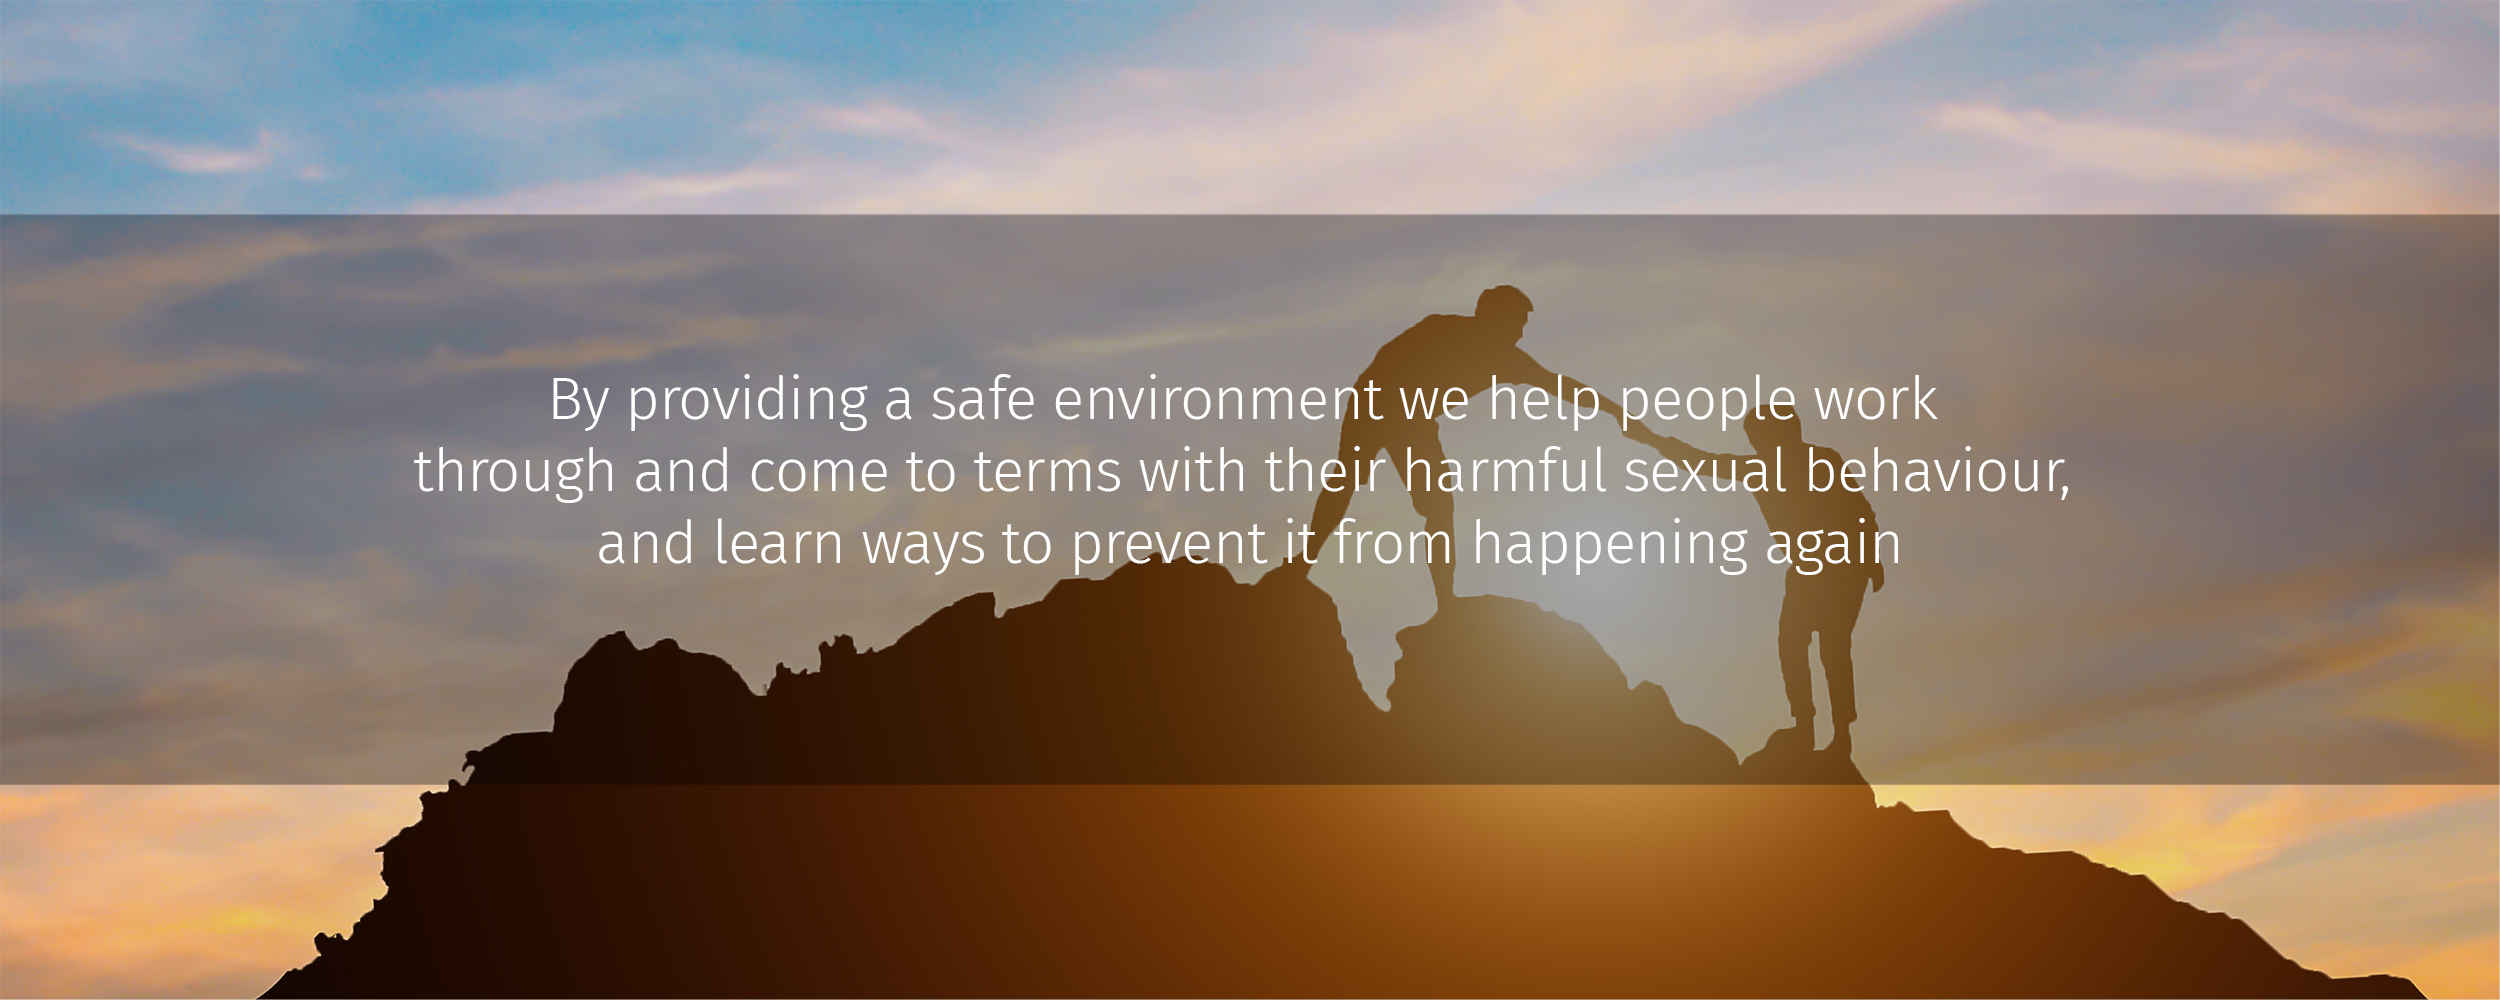 through a safe environment we help people work through and come to terms with their behaviour and learn ways to prevent the harmful sexual behaviour from reoccurring